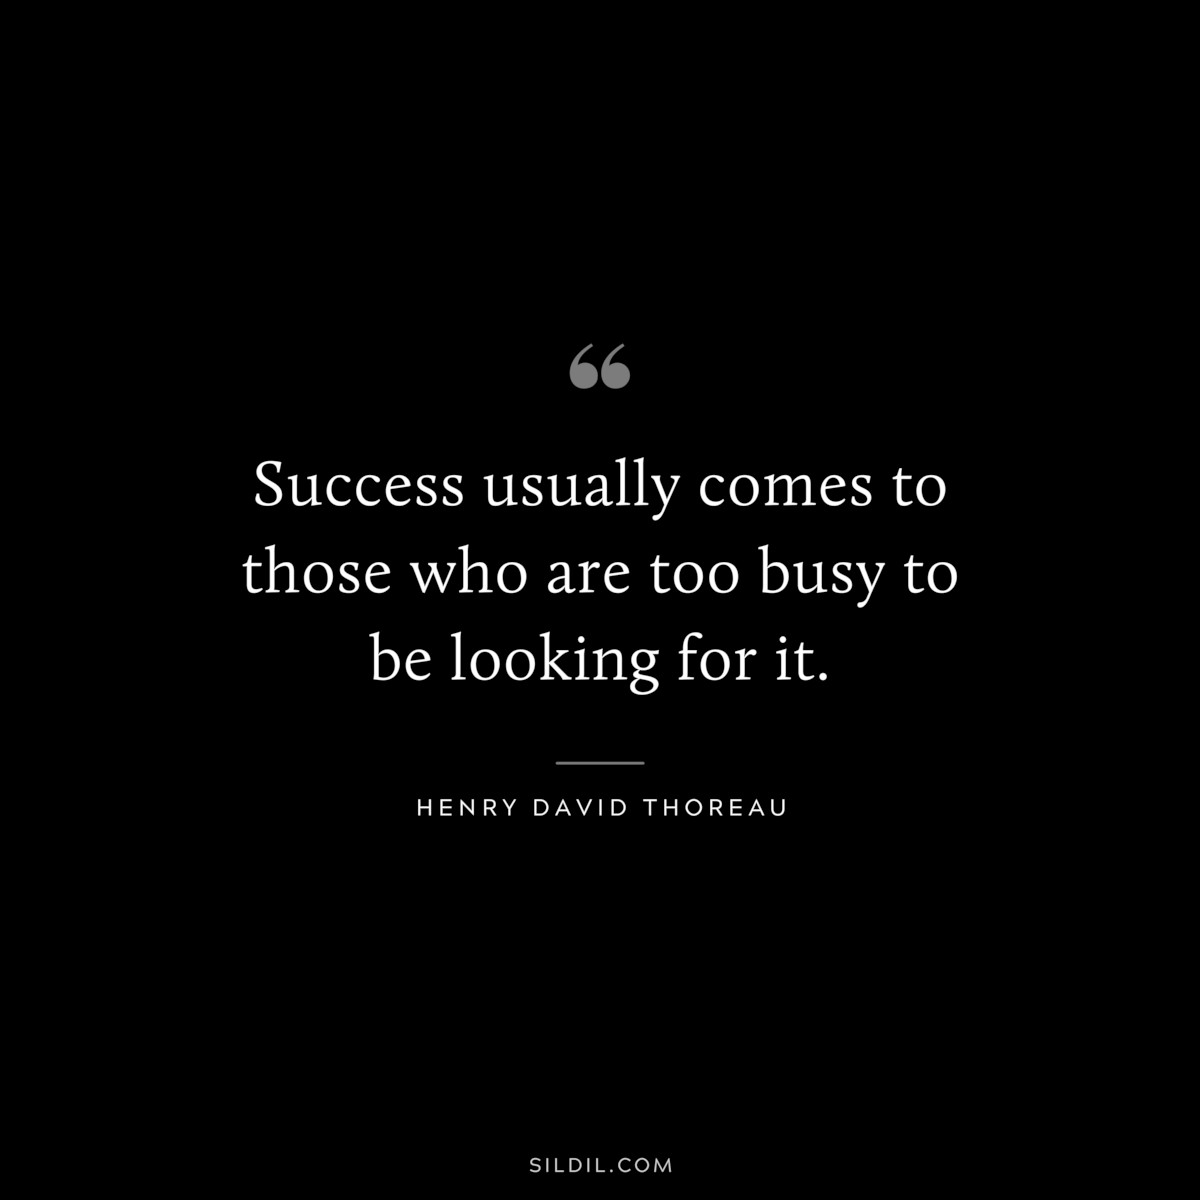 Success usually comes to those who are too busy to be looking for it. ― Henry David Thoreau